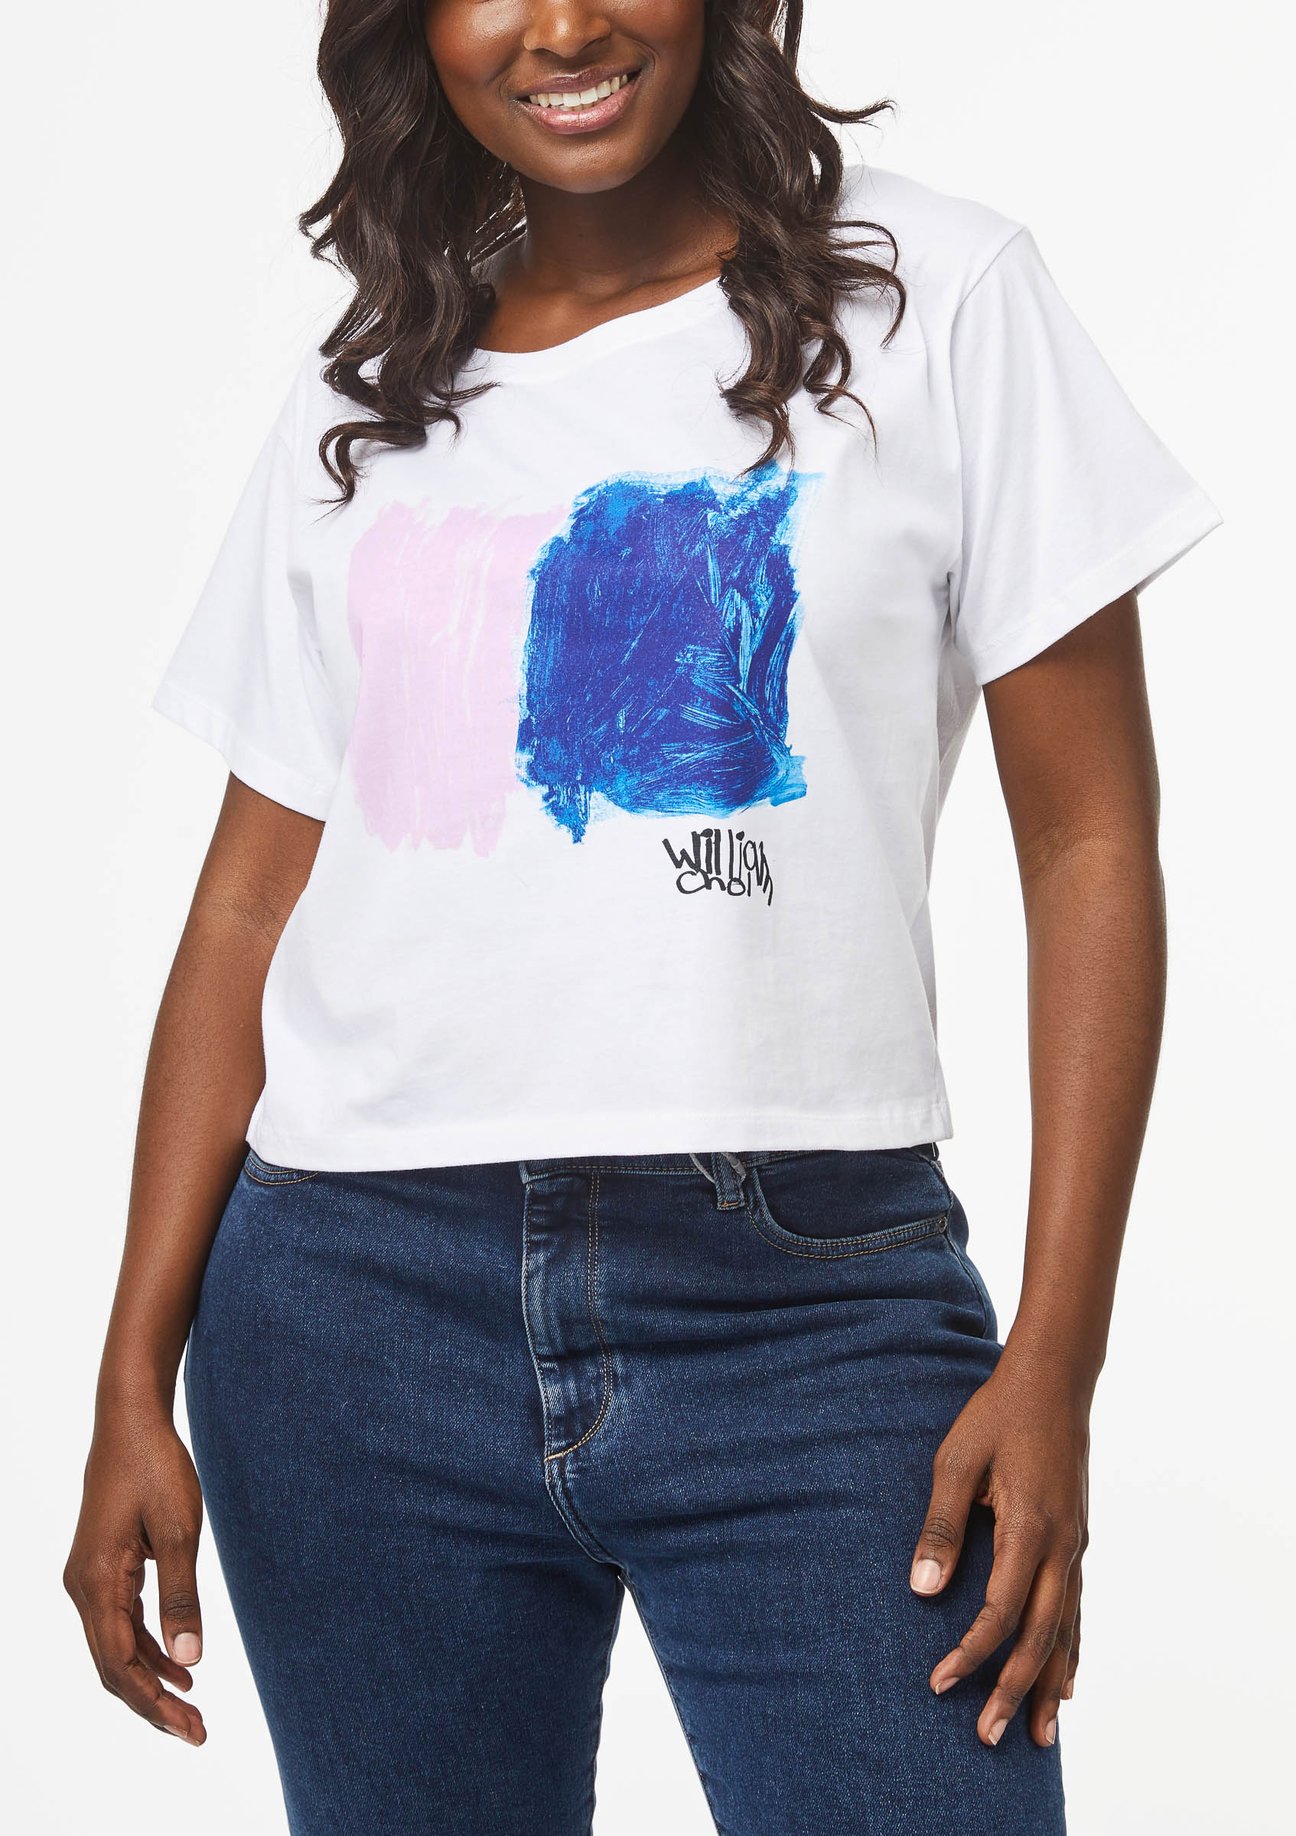 Tee from the Alivia clothing line created by adults with autism